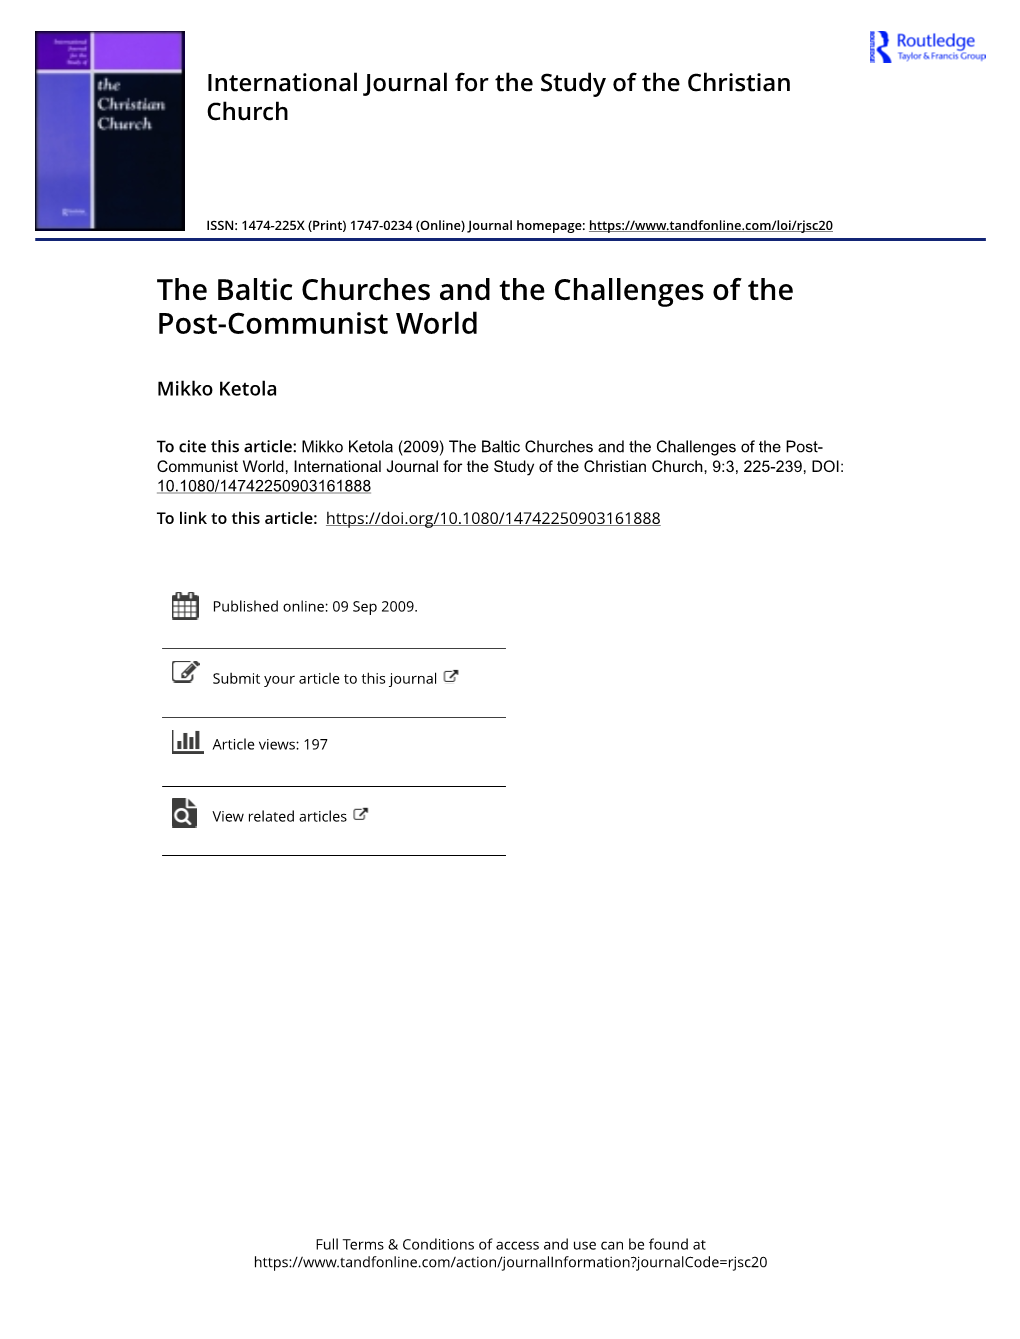 The Baltic Churches and the Challenges of the Post-Communist World